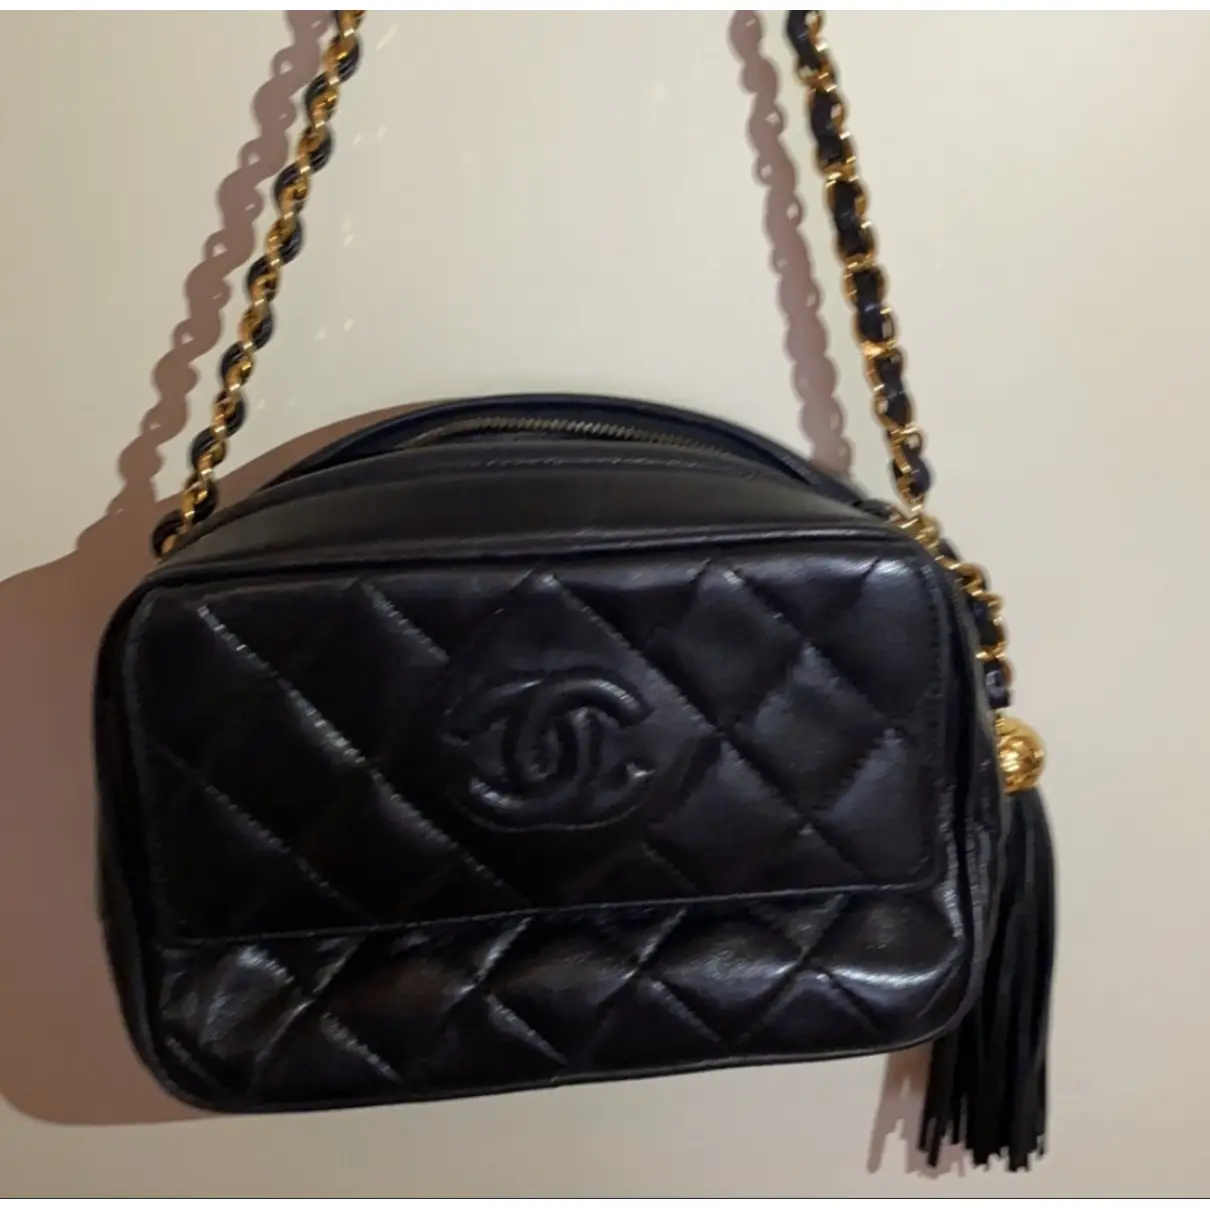 Buy Chanel Wallet On Chain Timeless/Classique leather crossbody bag online - Vintage